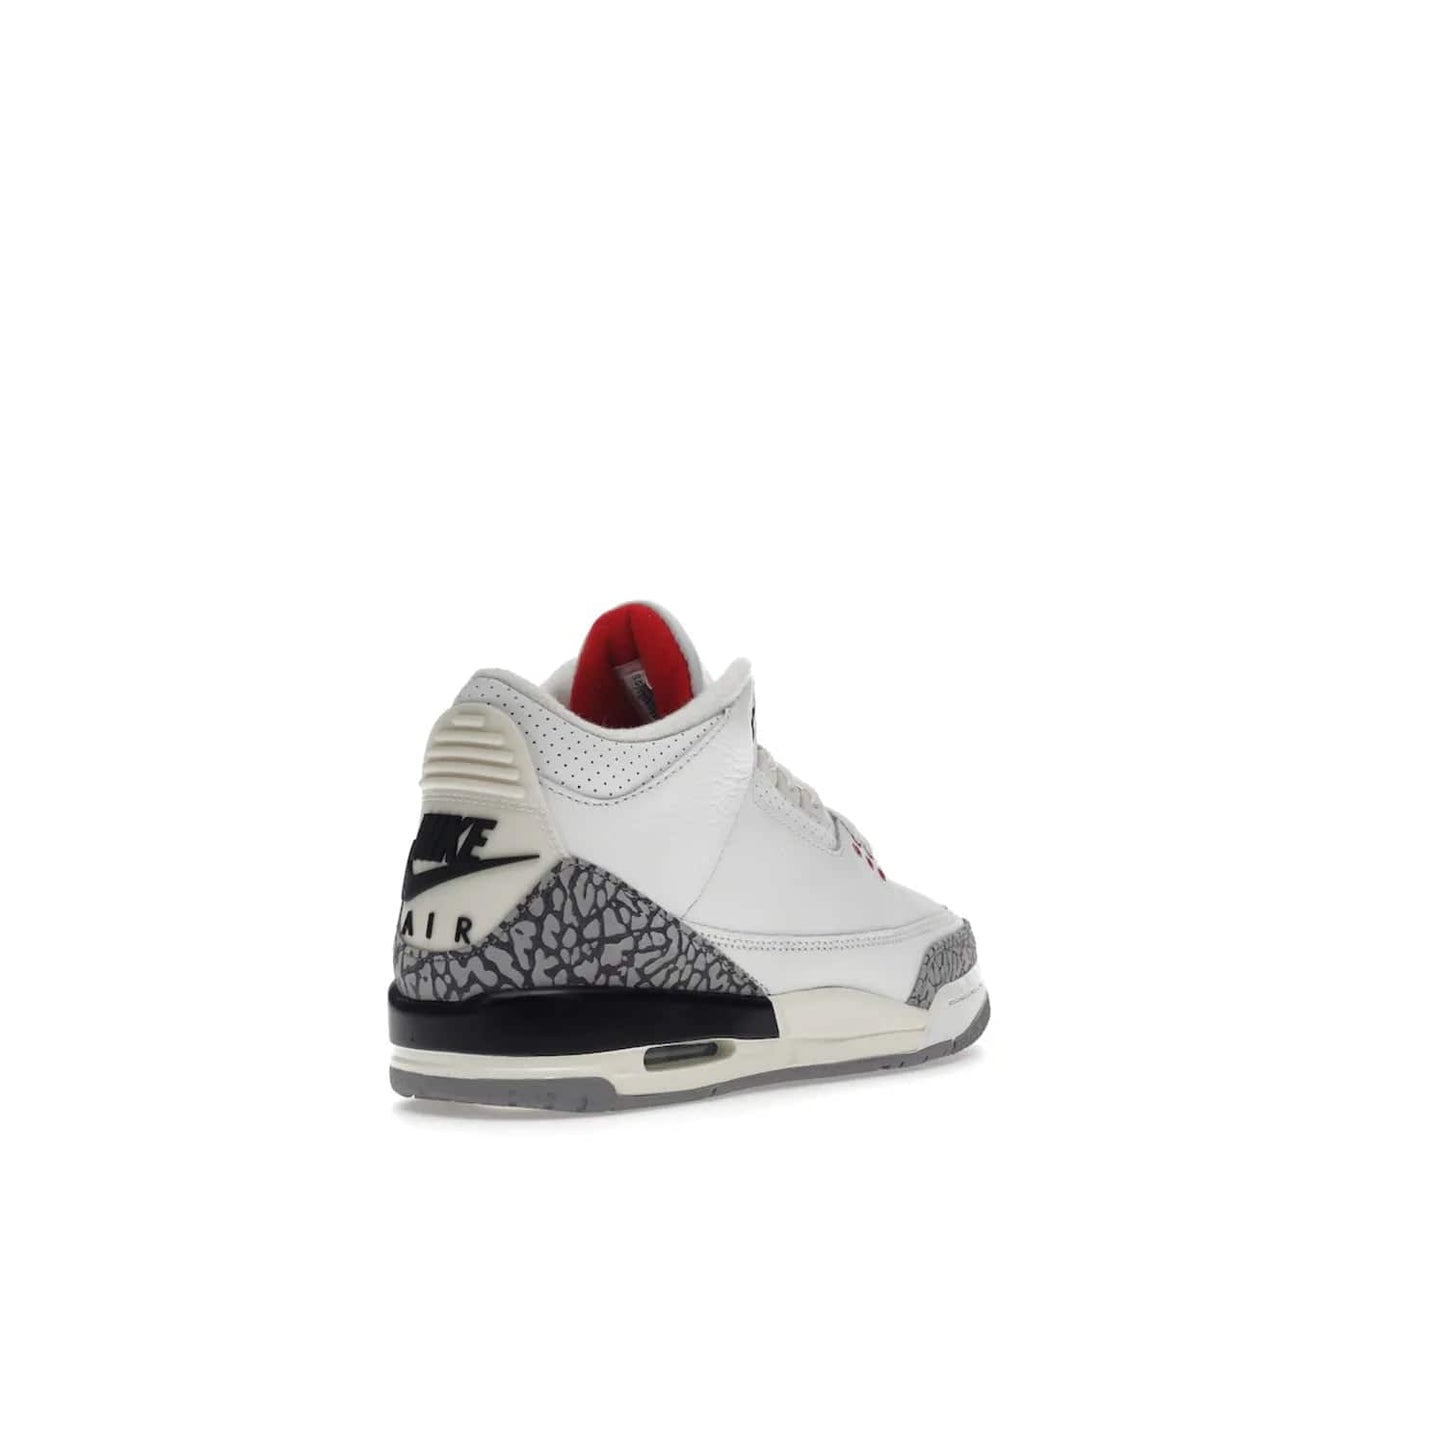 Jordan 3 Retro White Cement Reimagined (GS) - Image 32 - Only at www.BallersClubKickz.com - Grab the perfect blend of modern design and classic style with the Jordan 3 Retro White Cement Reimagined (GS). Features Summit White, Fire Red, Black, and Cement Grey colorway, iconic Jordan logo embroidered on the tongue, and “Nike Air” branding. Limited availability, get your pair before March 11th 2023.